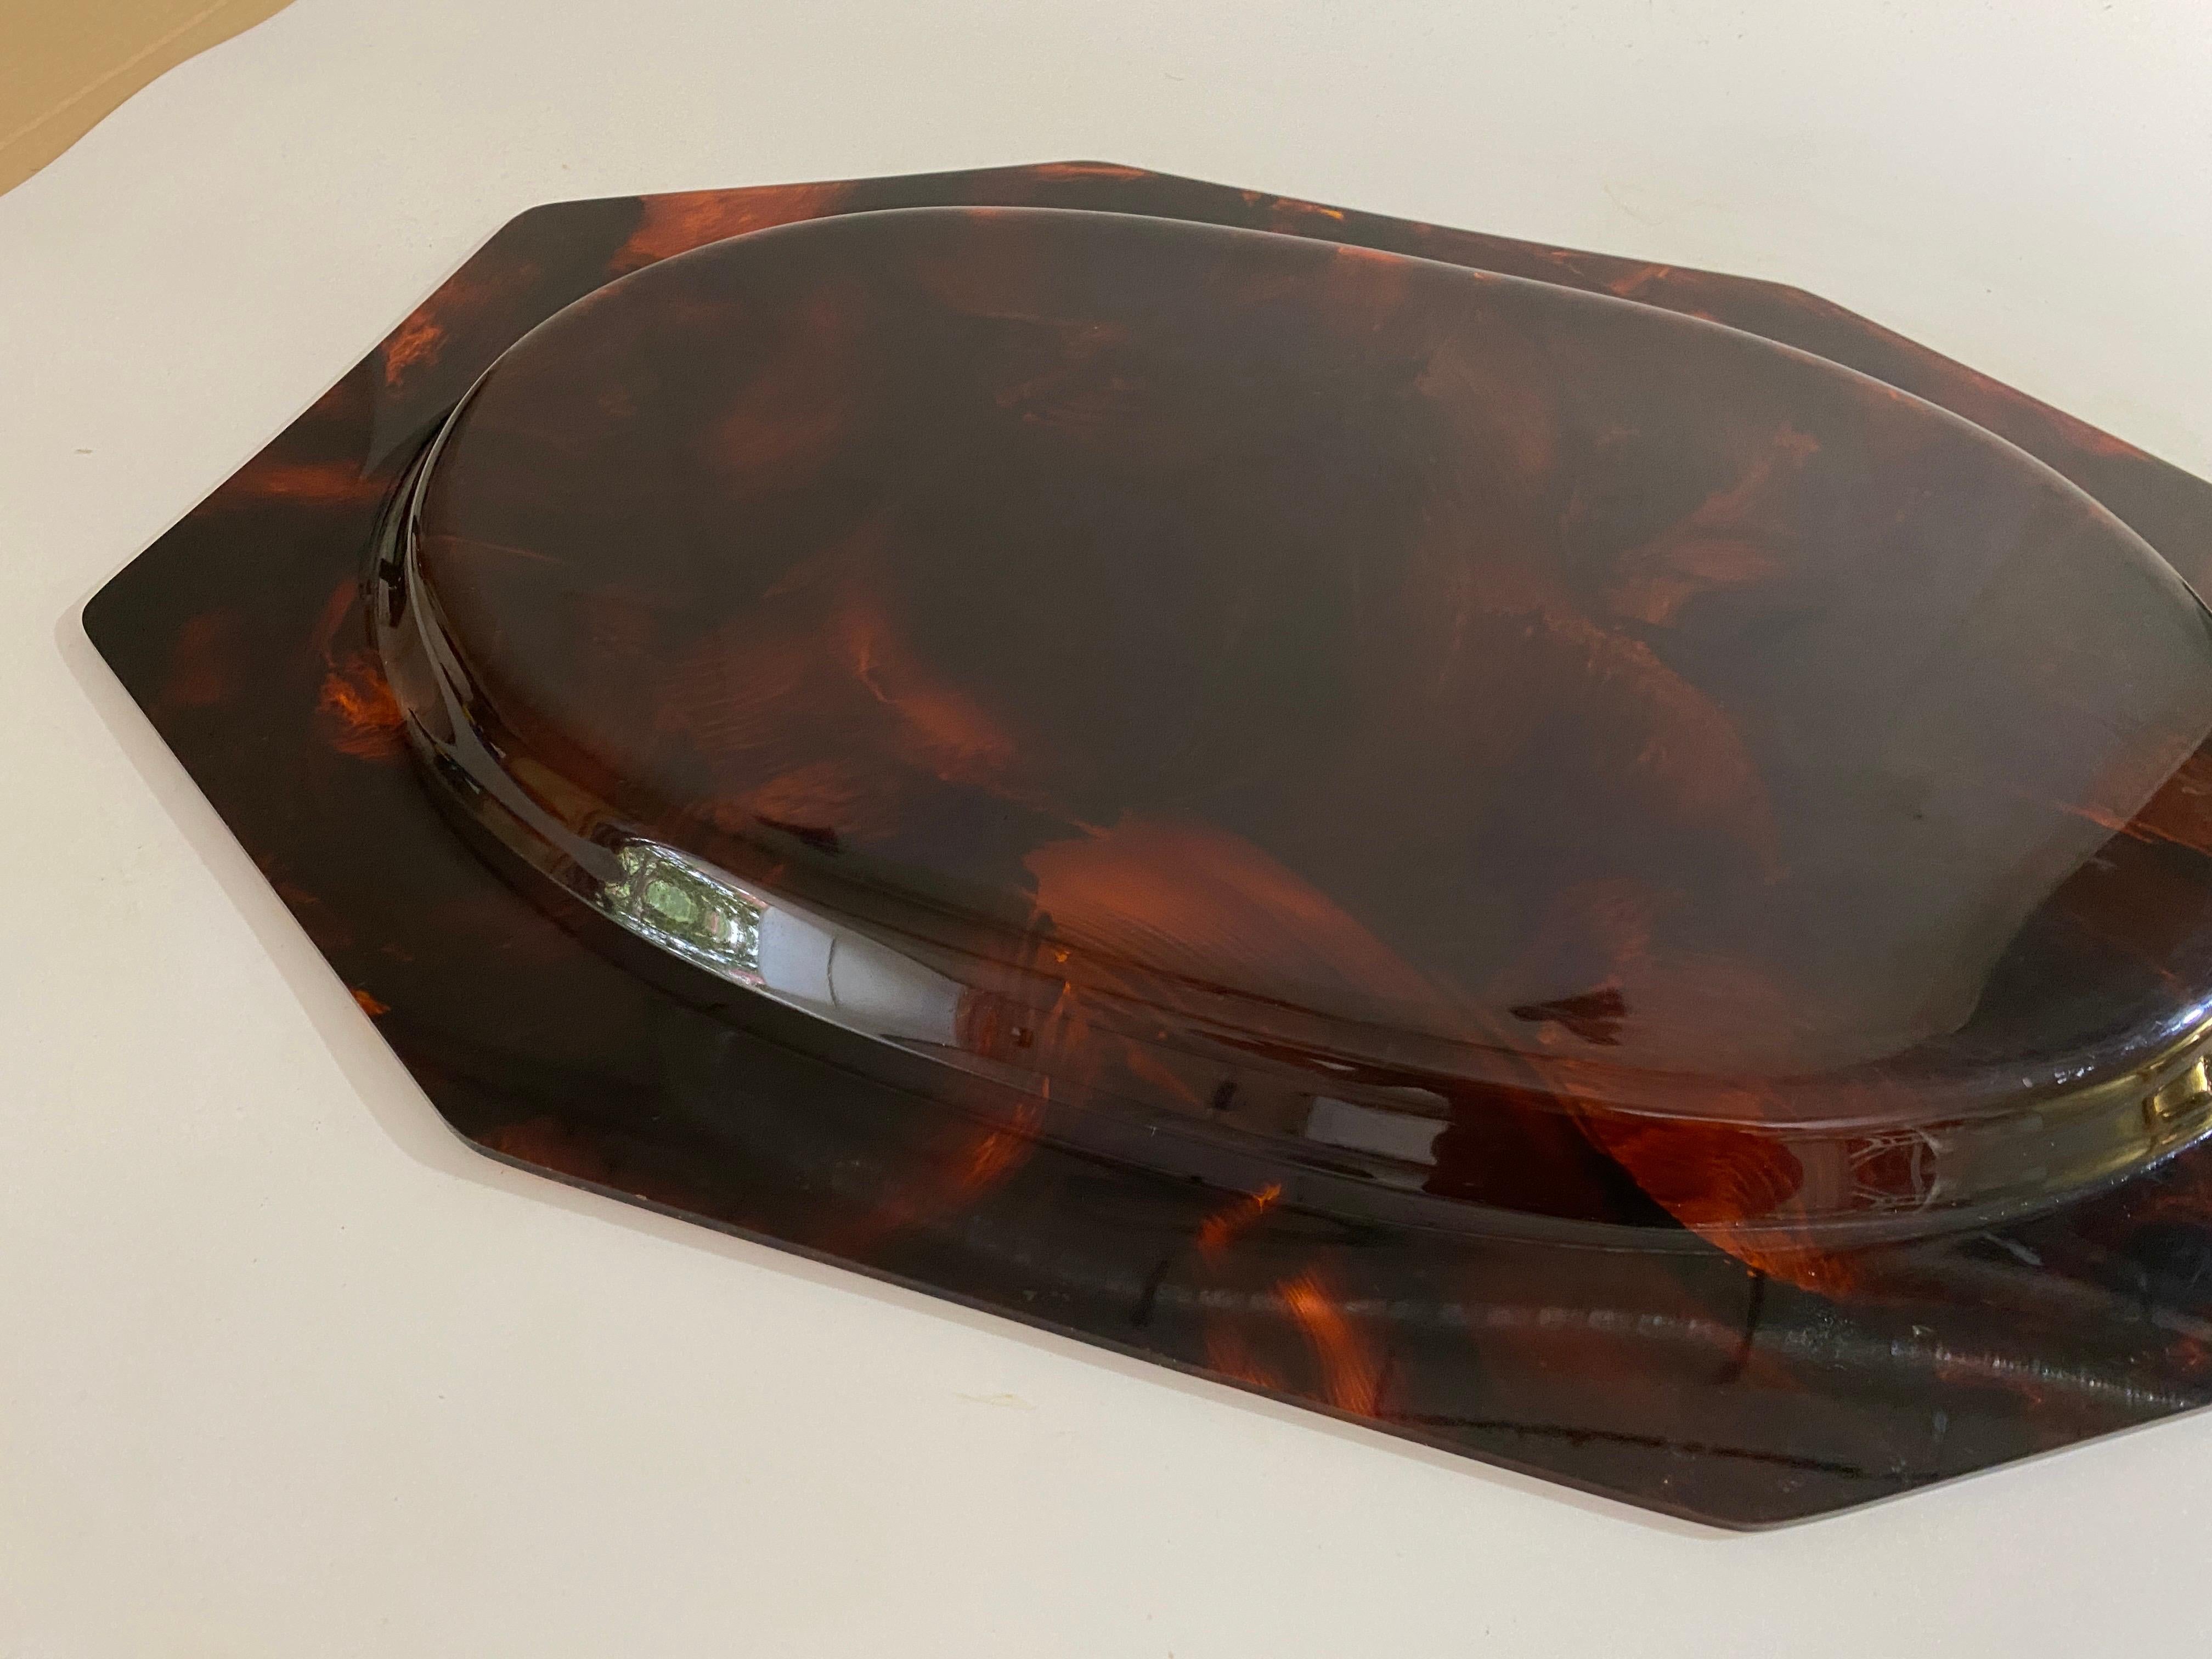 Faux tortoiseshell tray, attributed to Christian Dior. It was made in France in the 1970's.
Fire-colored, shimmering, resembling tortoiseshell. 
In good condition.